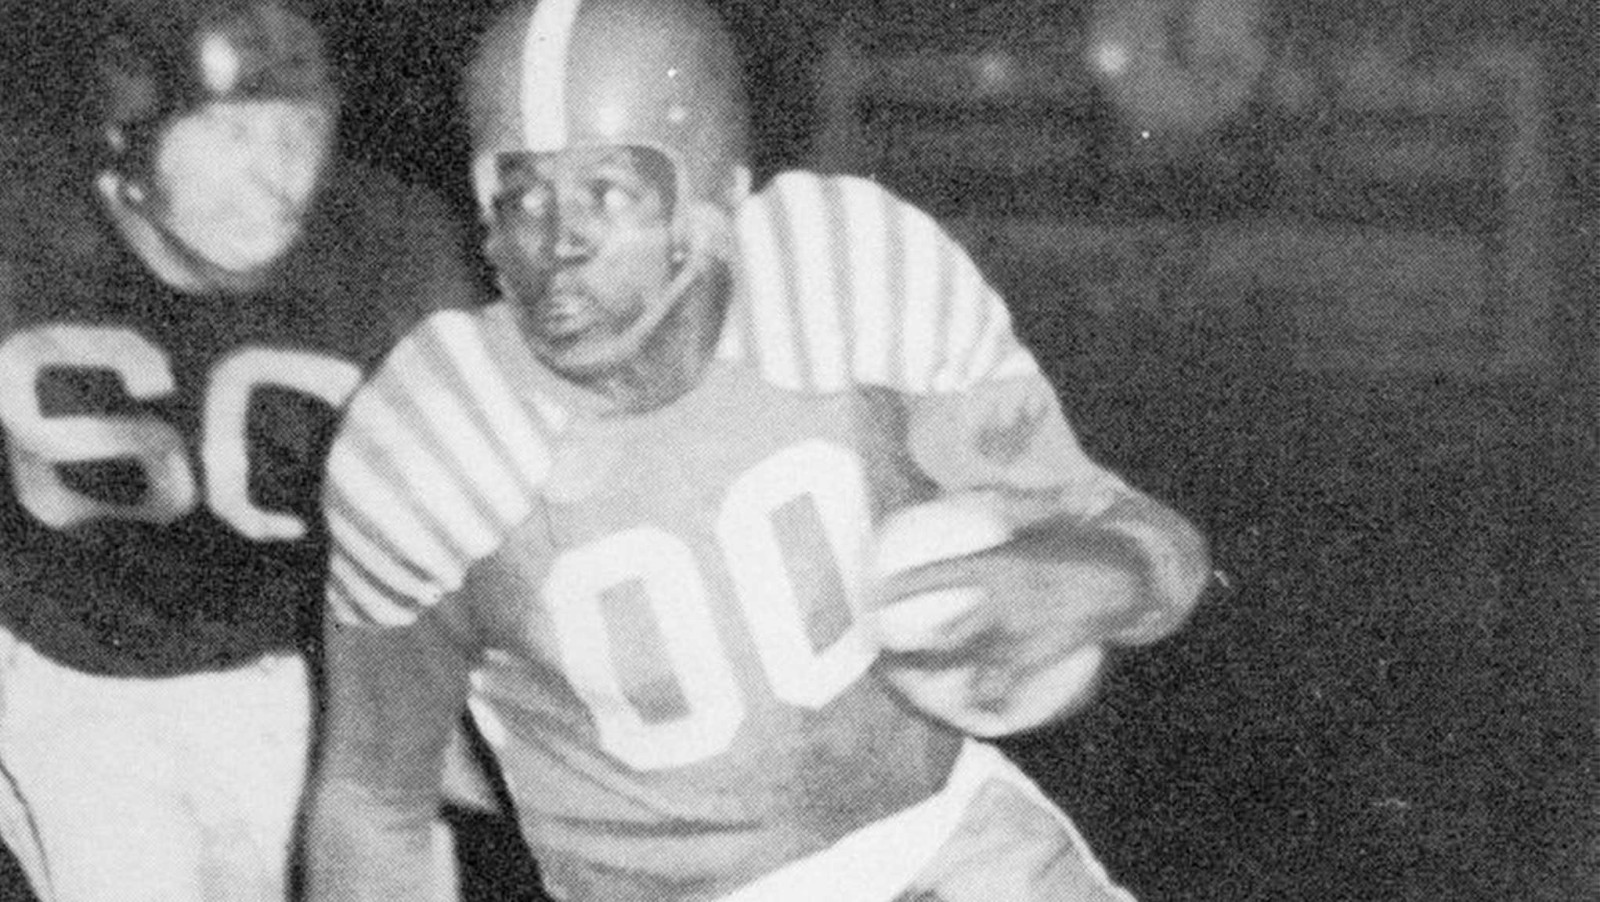 CFL mourns the passing of Ezzrett ‘Sugarfoot’ Anderson